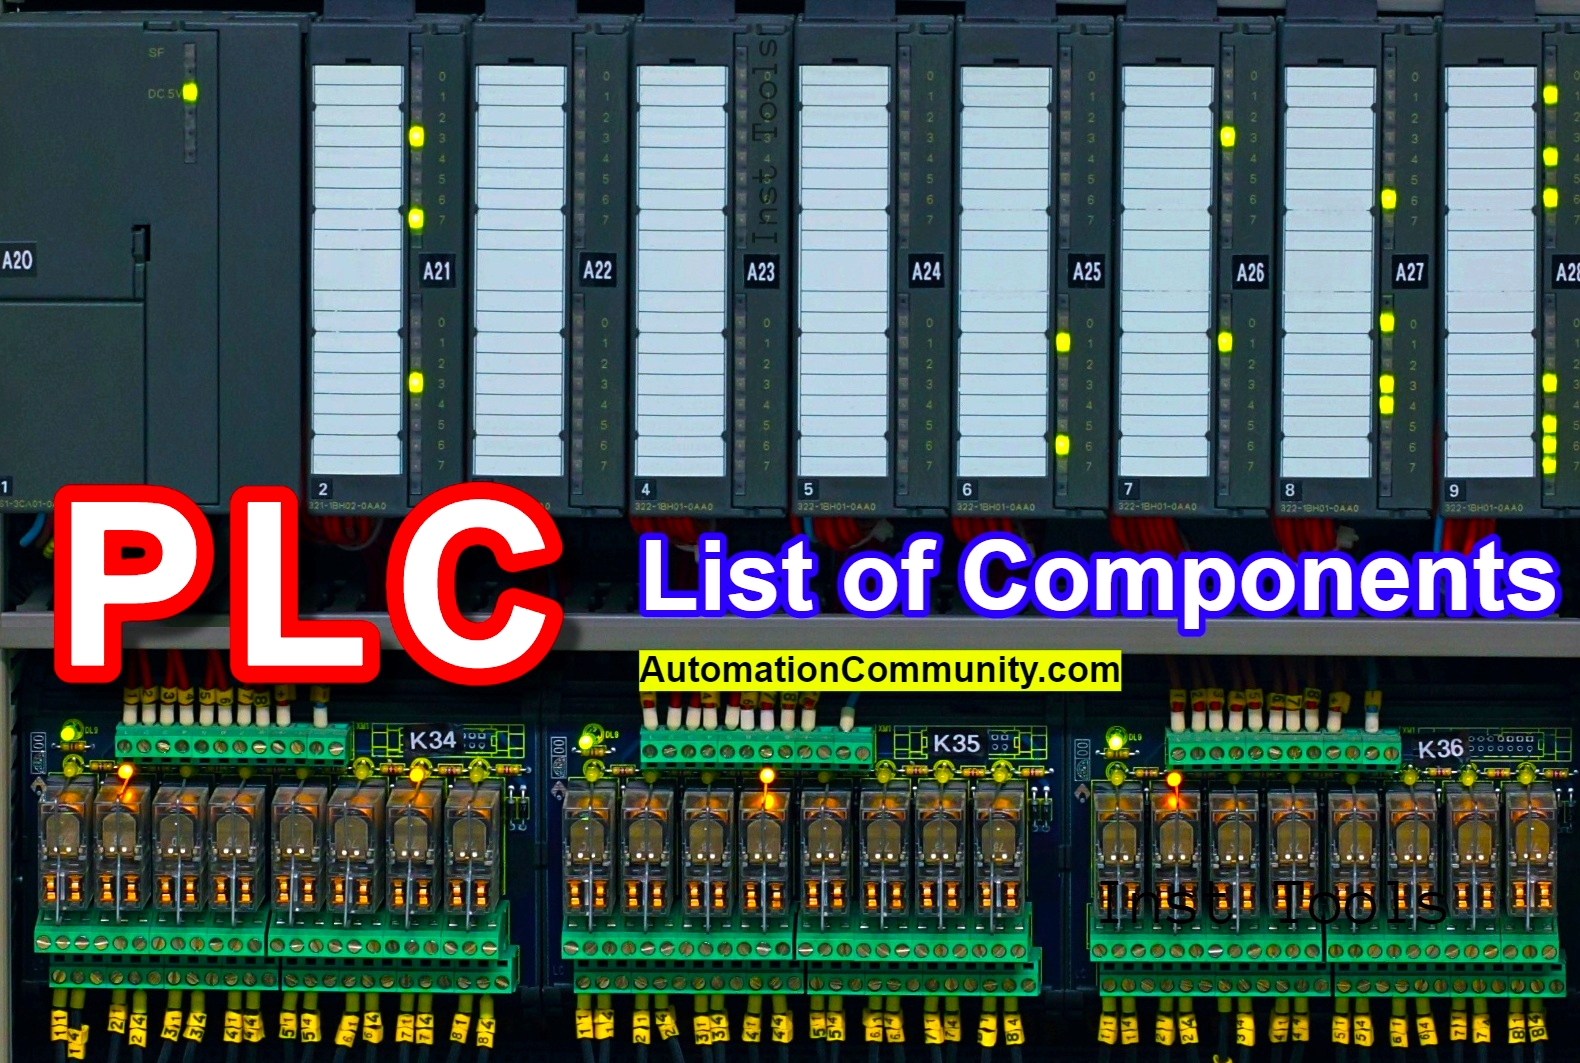 List of Components in PLC